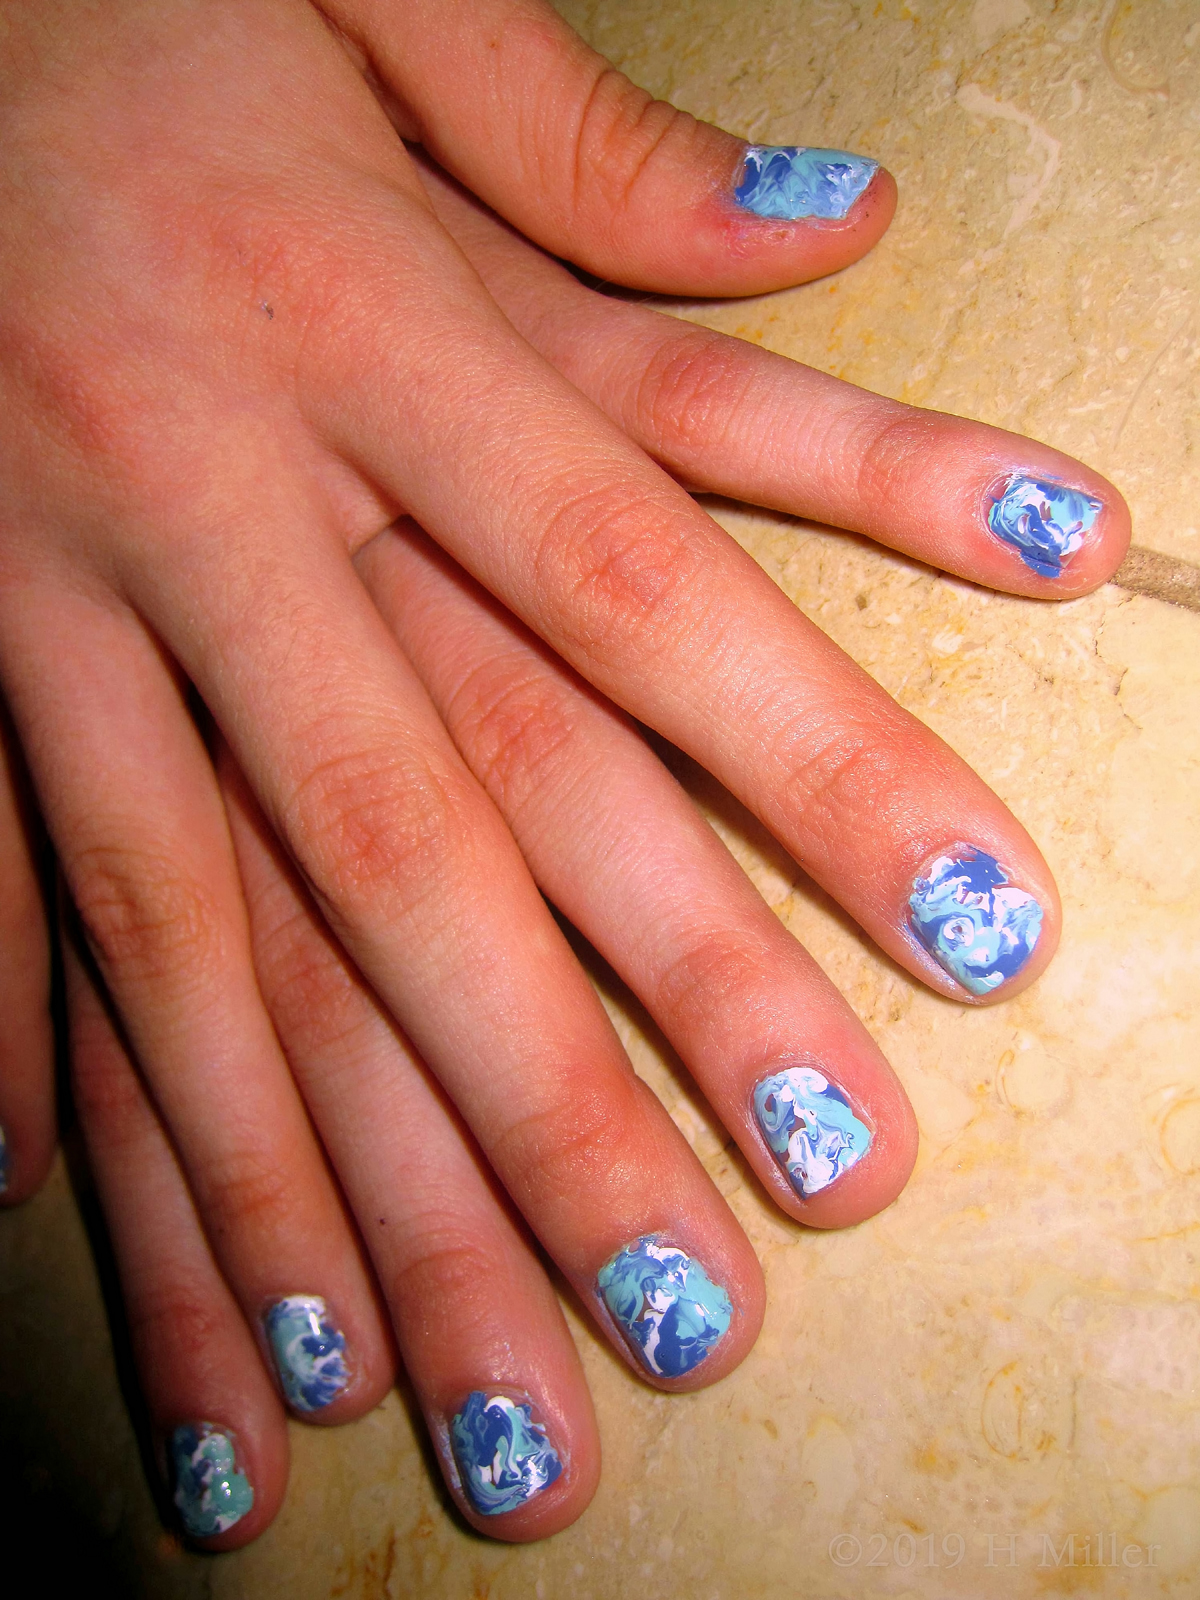 Another View Of The Lovely Swirled Kids Nail Design! 